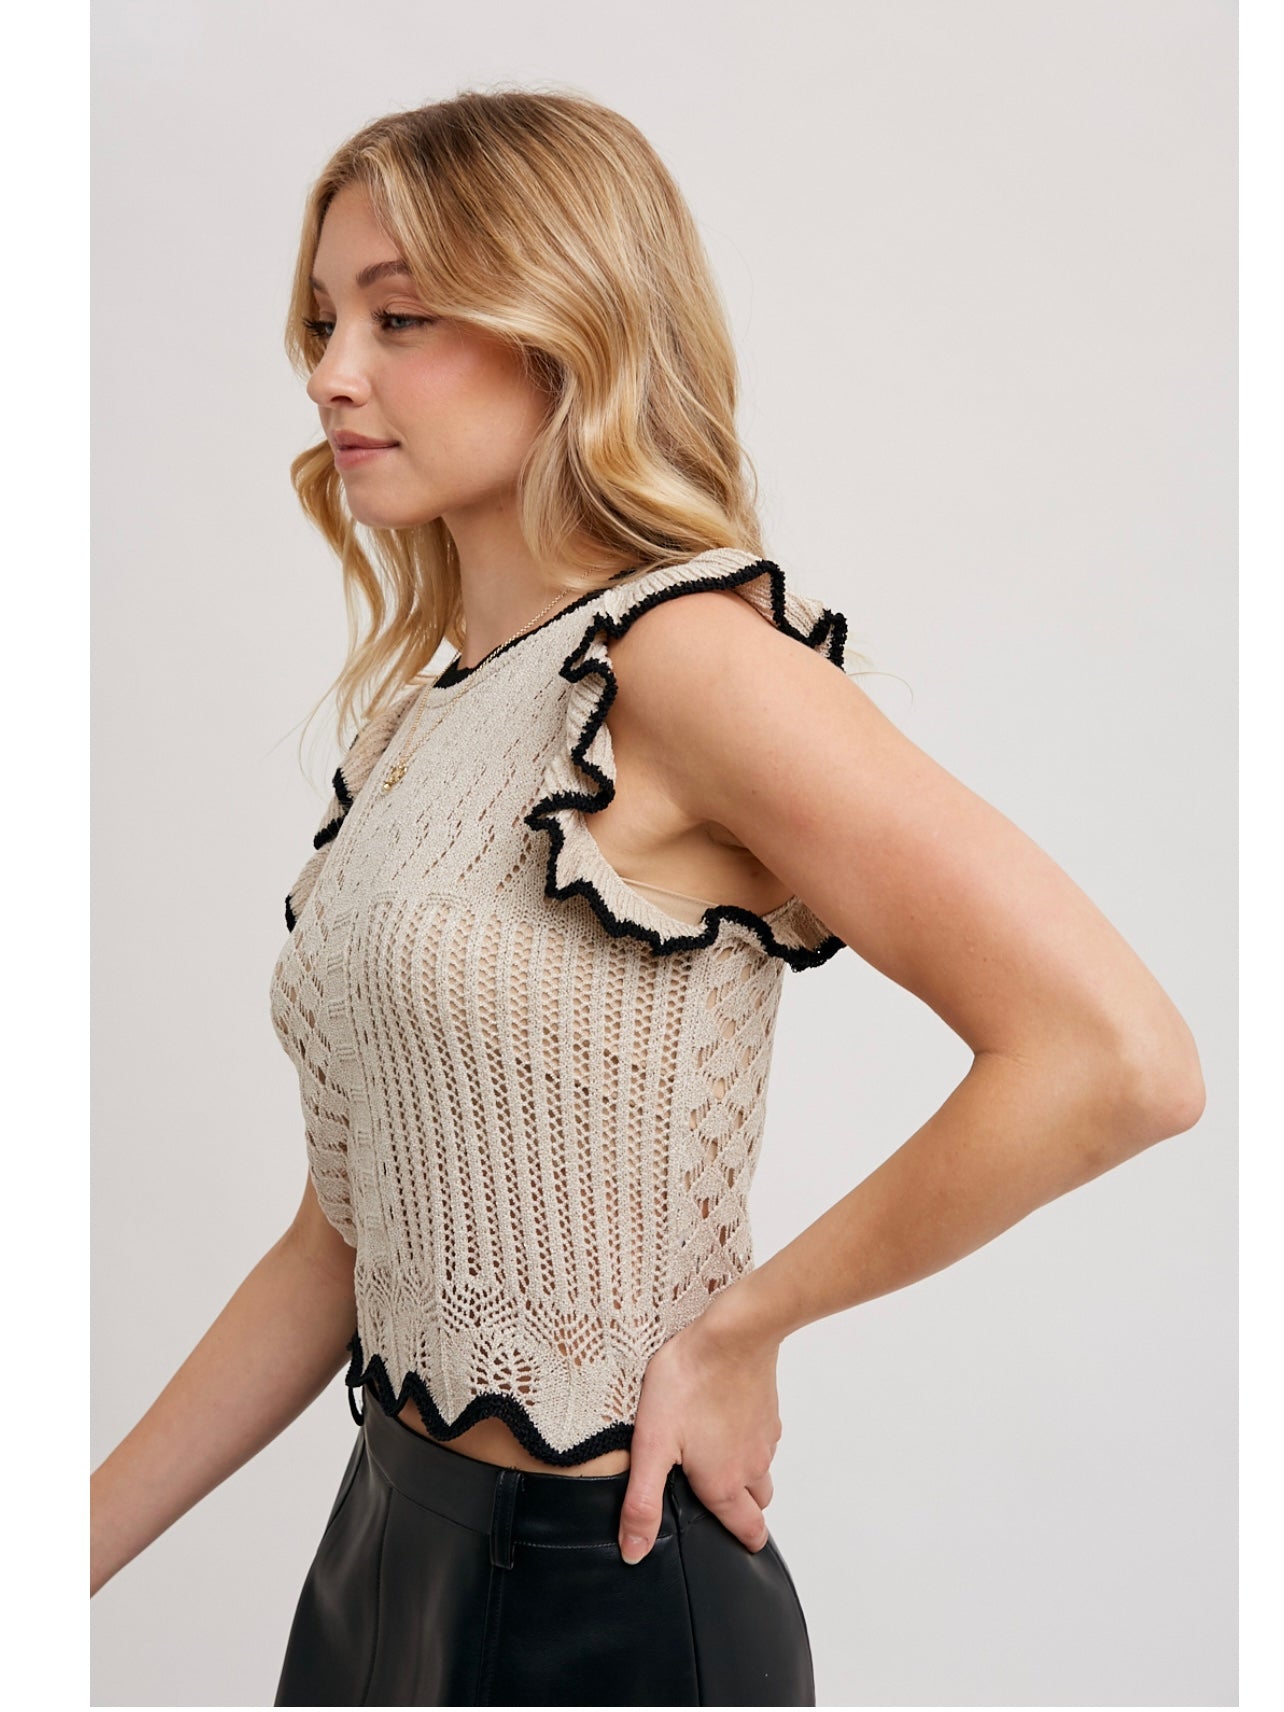 The Lori-Eyelet Contrast Knit Ruffled Scalloped Top in Oatmeal